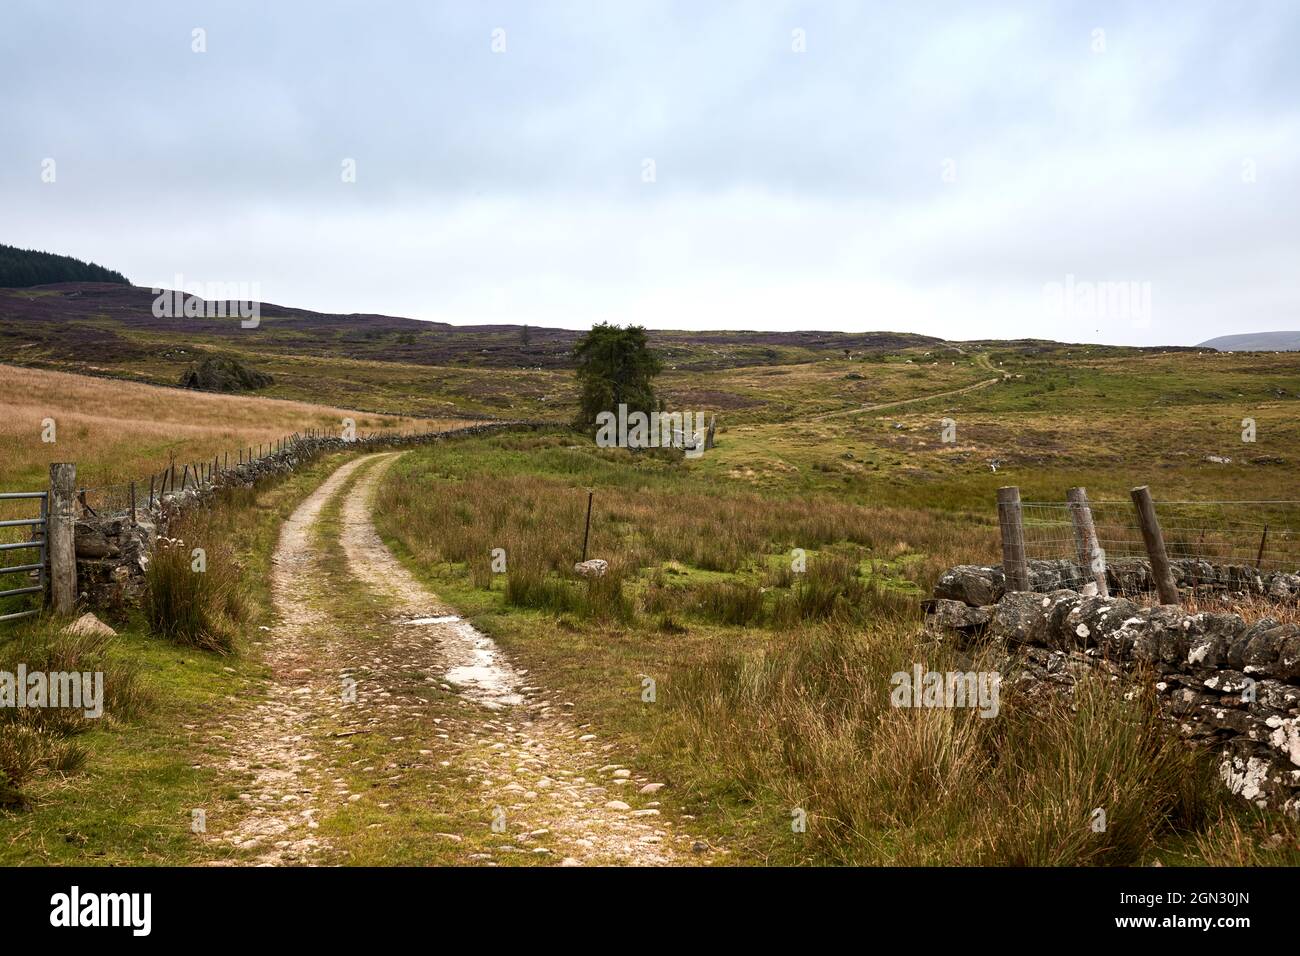 Off road track in the landscape Stock Photo